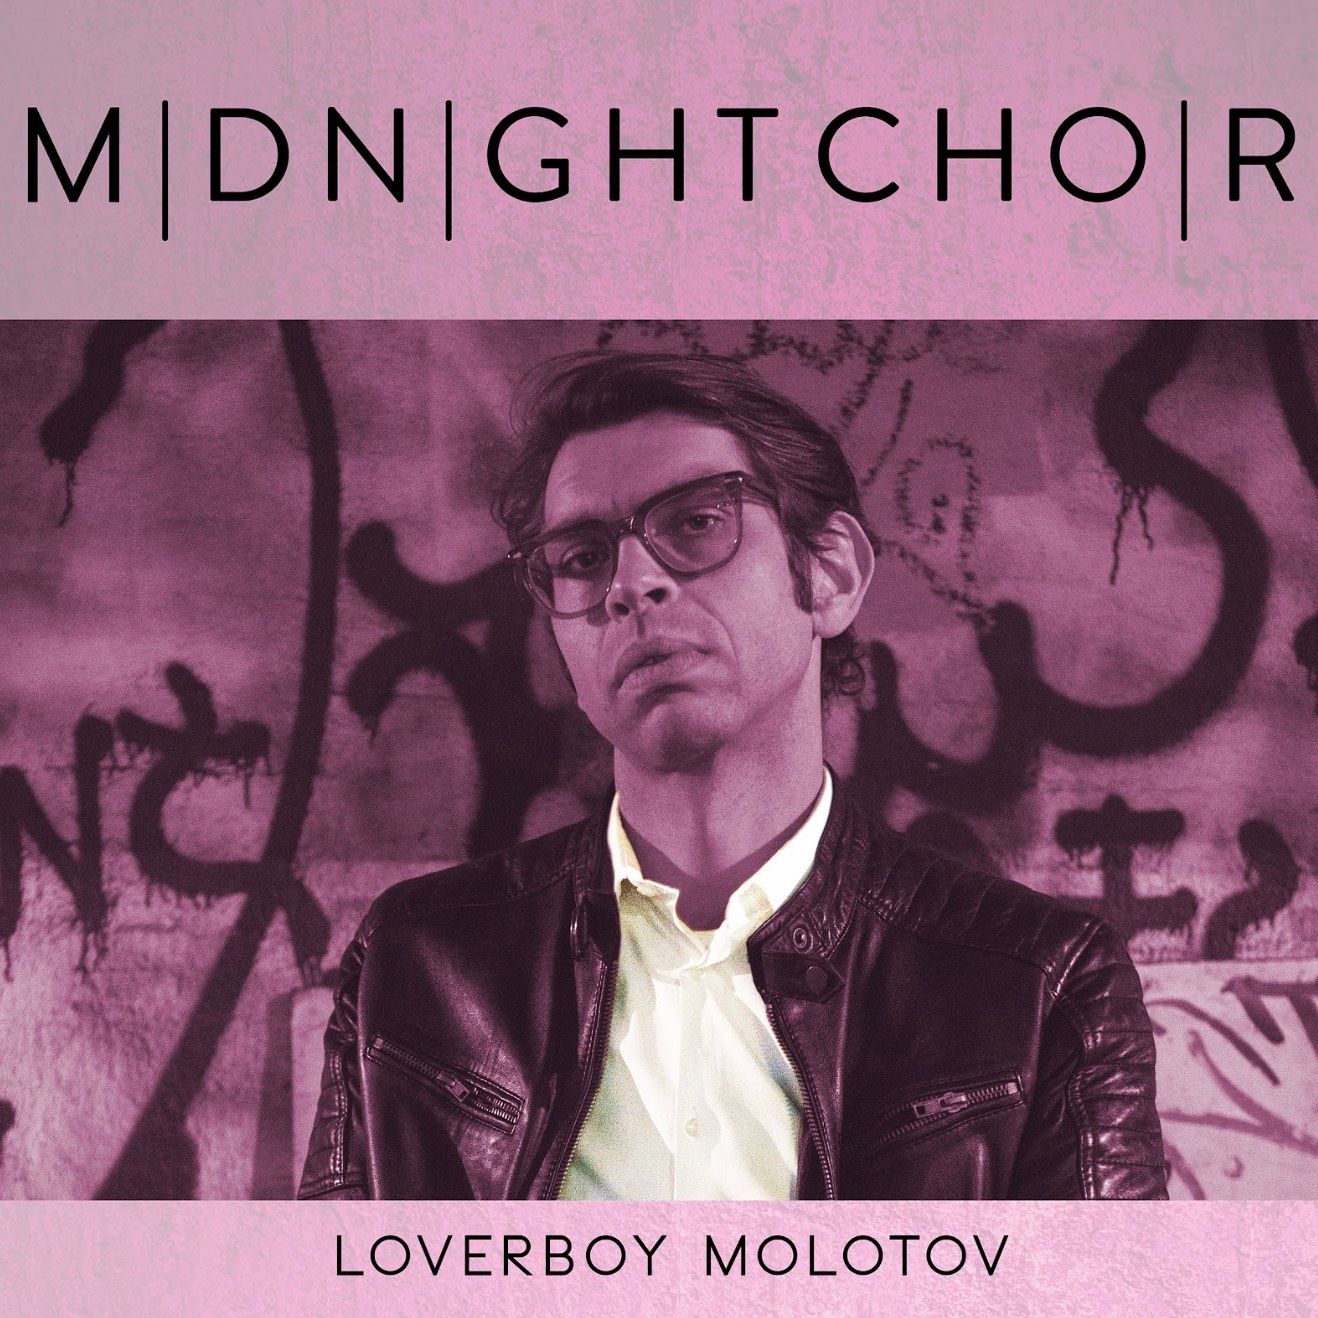 STEREO EMBERS EXCLUSIVE TRACK PREMIERE – “Rising Tide” from LGBTQ Activist, Darkwave Artist Patrick Bobilin AKA MIDNIGHTCHOIR from Forthcoming Album “Loverboy Molotov” + 4 bonus interview questions